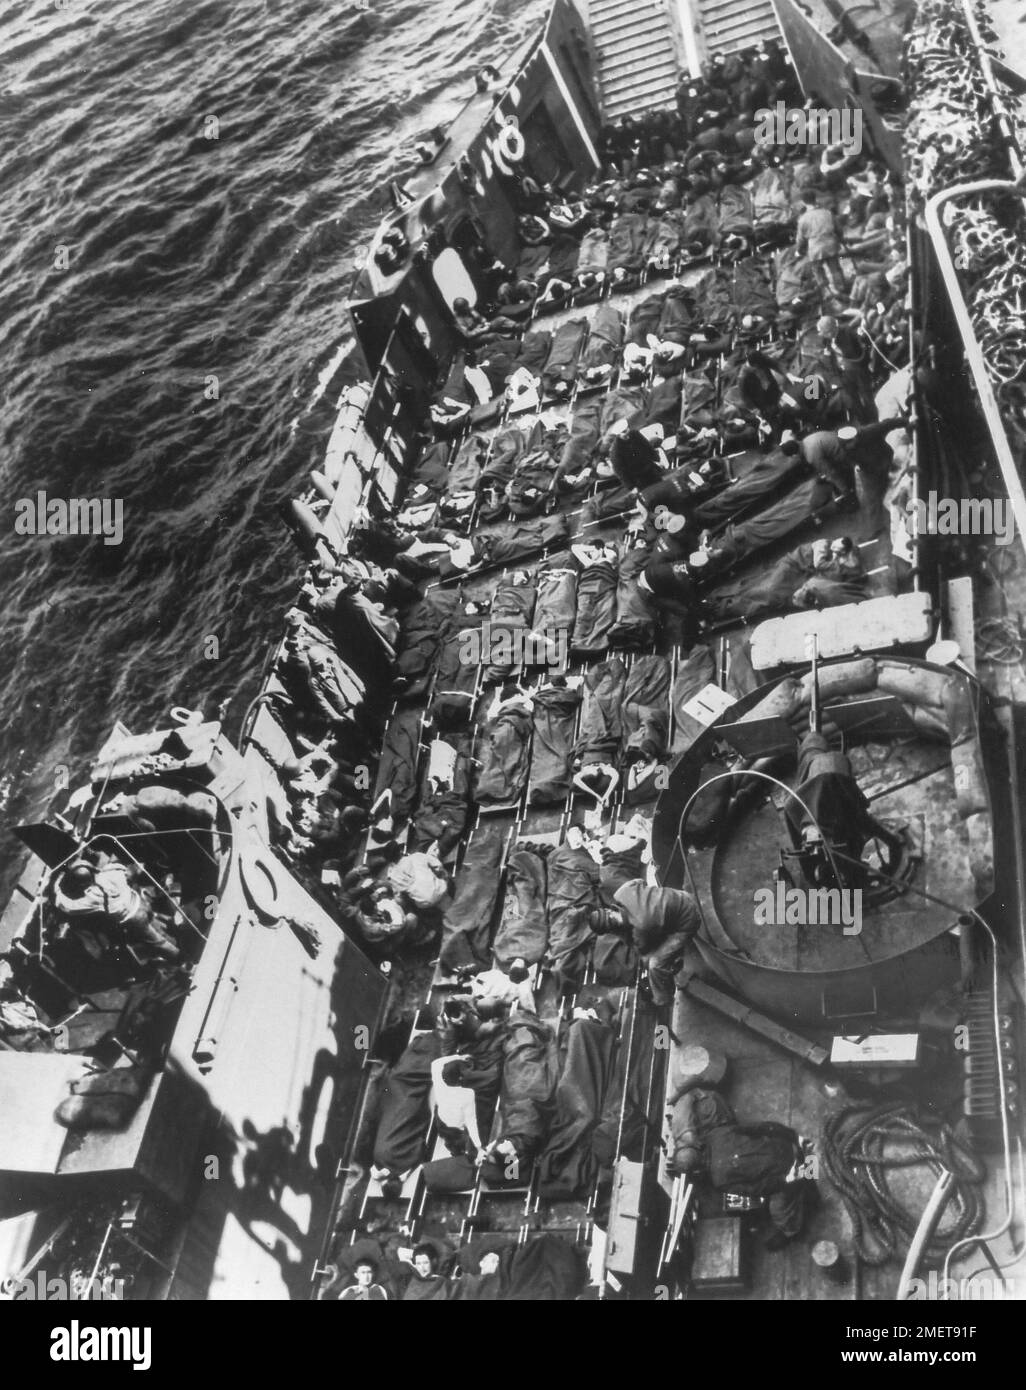 Photograph of Stretchers Covering the Decks of a Coast Guard LCT. Beachheads Come High- Row upon row of stretchers cover the decks of a Coast Guard LCT bringing out wounded invaders from the flaming soil of France. These American and British soldiers fell somewhere between the beachhead and Cherbourg as Nazi defenders sought a high price in casualties for every yard they yielded. The wounded are being transferred to a Coast Guard assault transport which will carry them back to England for hospitalization. 1939 - 1967. Stock Photo